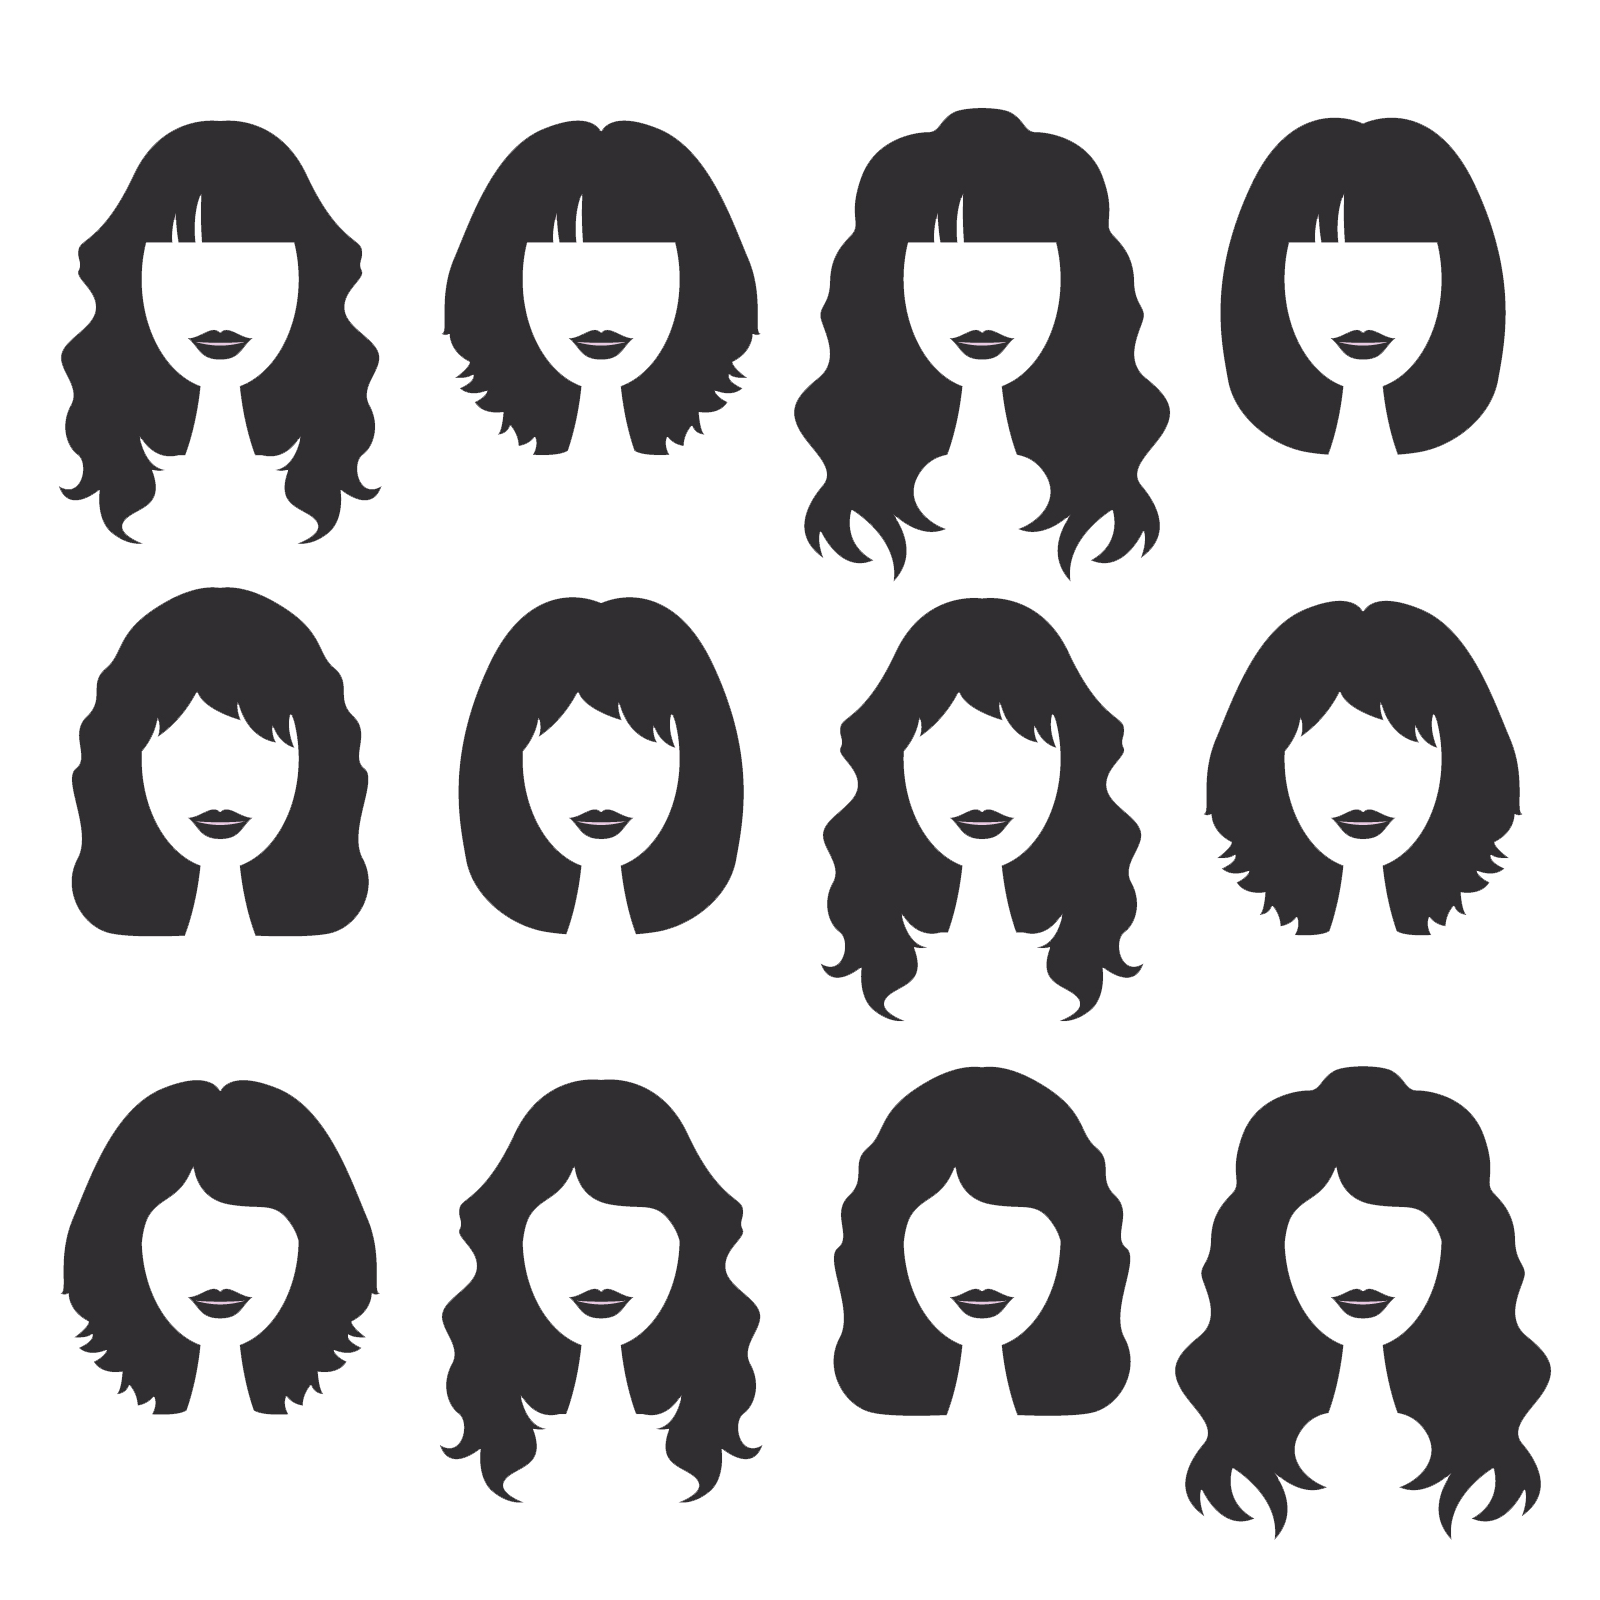 Haircut clipart beauty parlour girl. Hairstyle variety girls pull